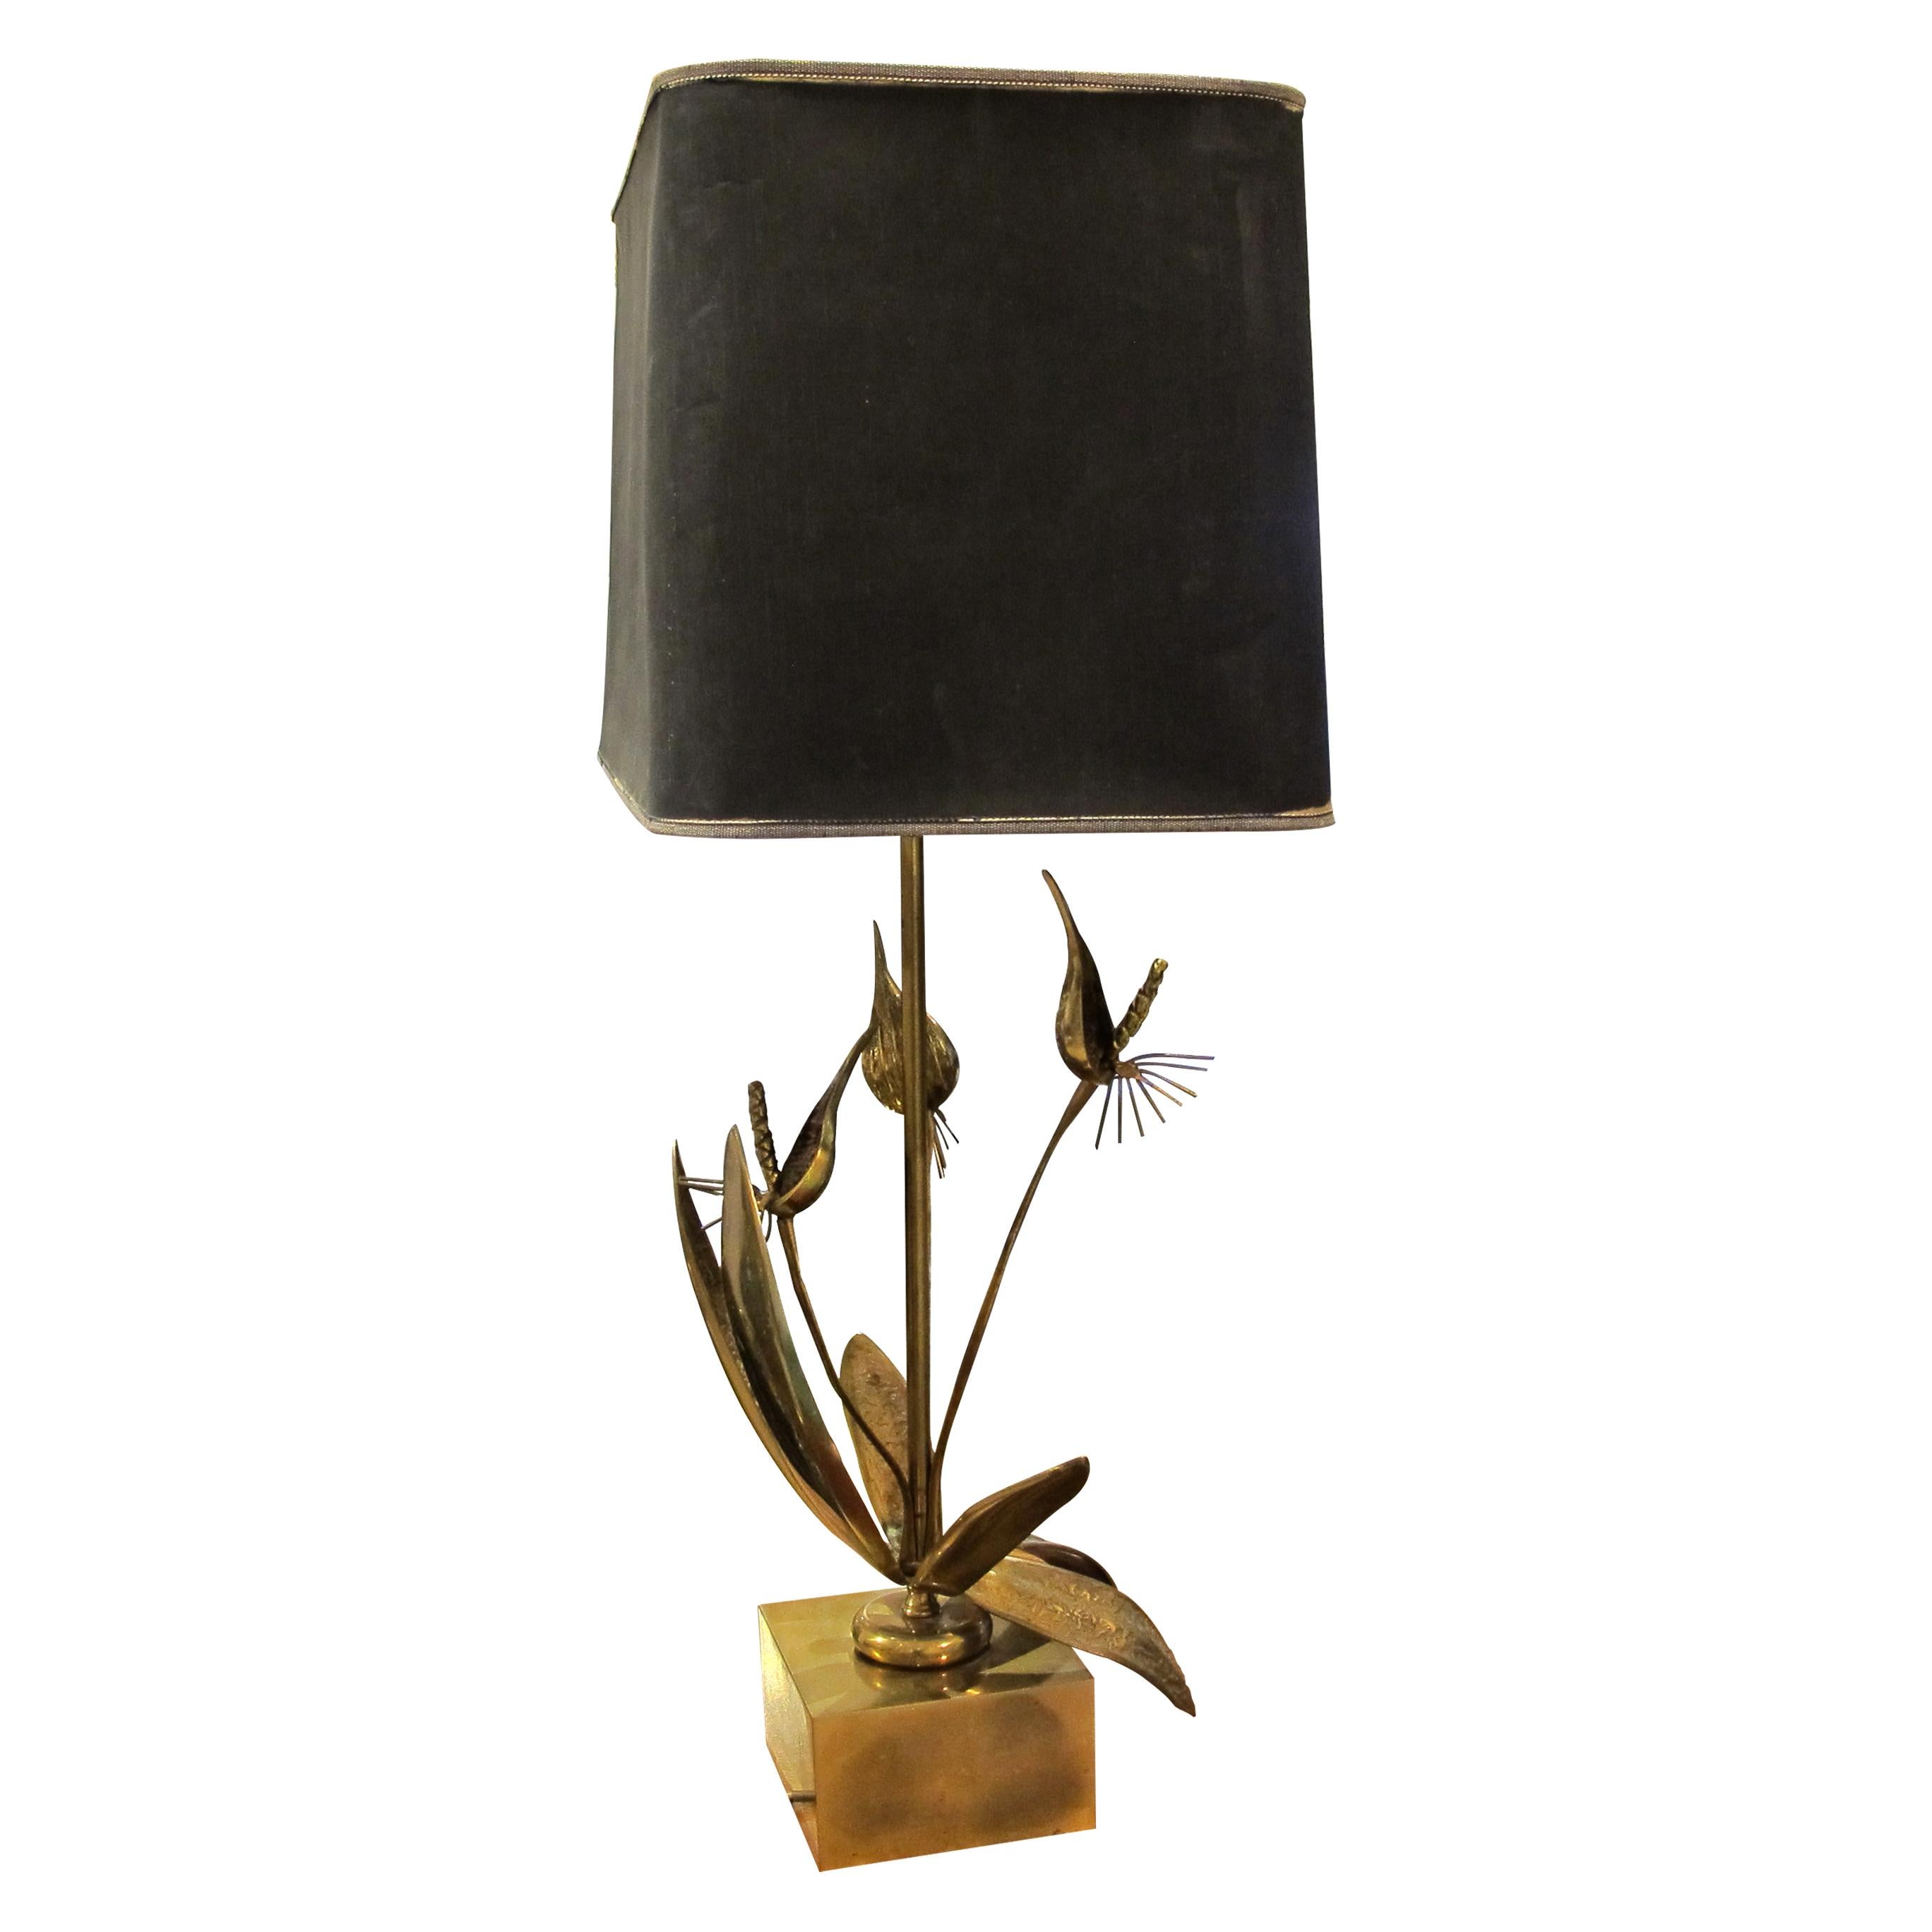 1970s highly decorative structural floral table lamp in the style of designer Willy Daro. This elegant table lamp has three exotic flowers and six leaves which are made of bronze; they are presented on a brass base. The lamp comes with its original